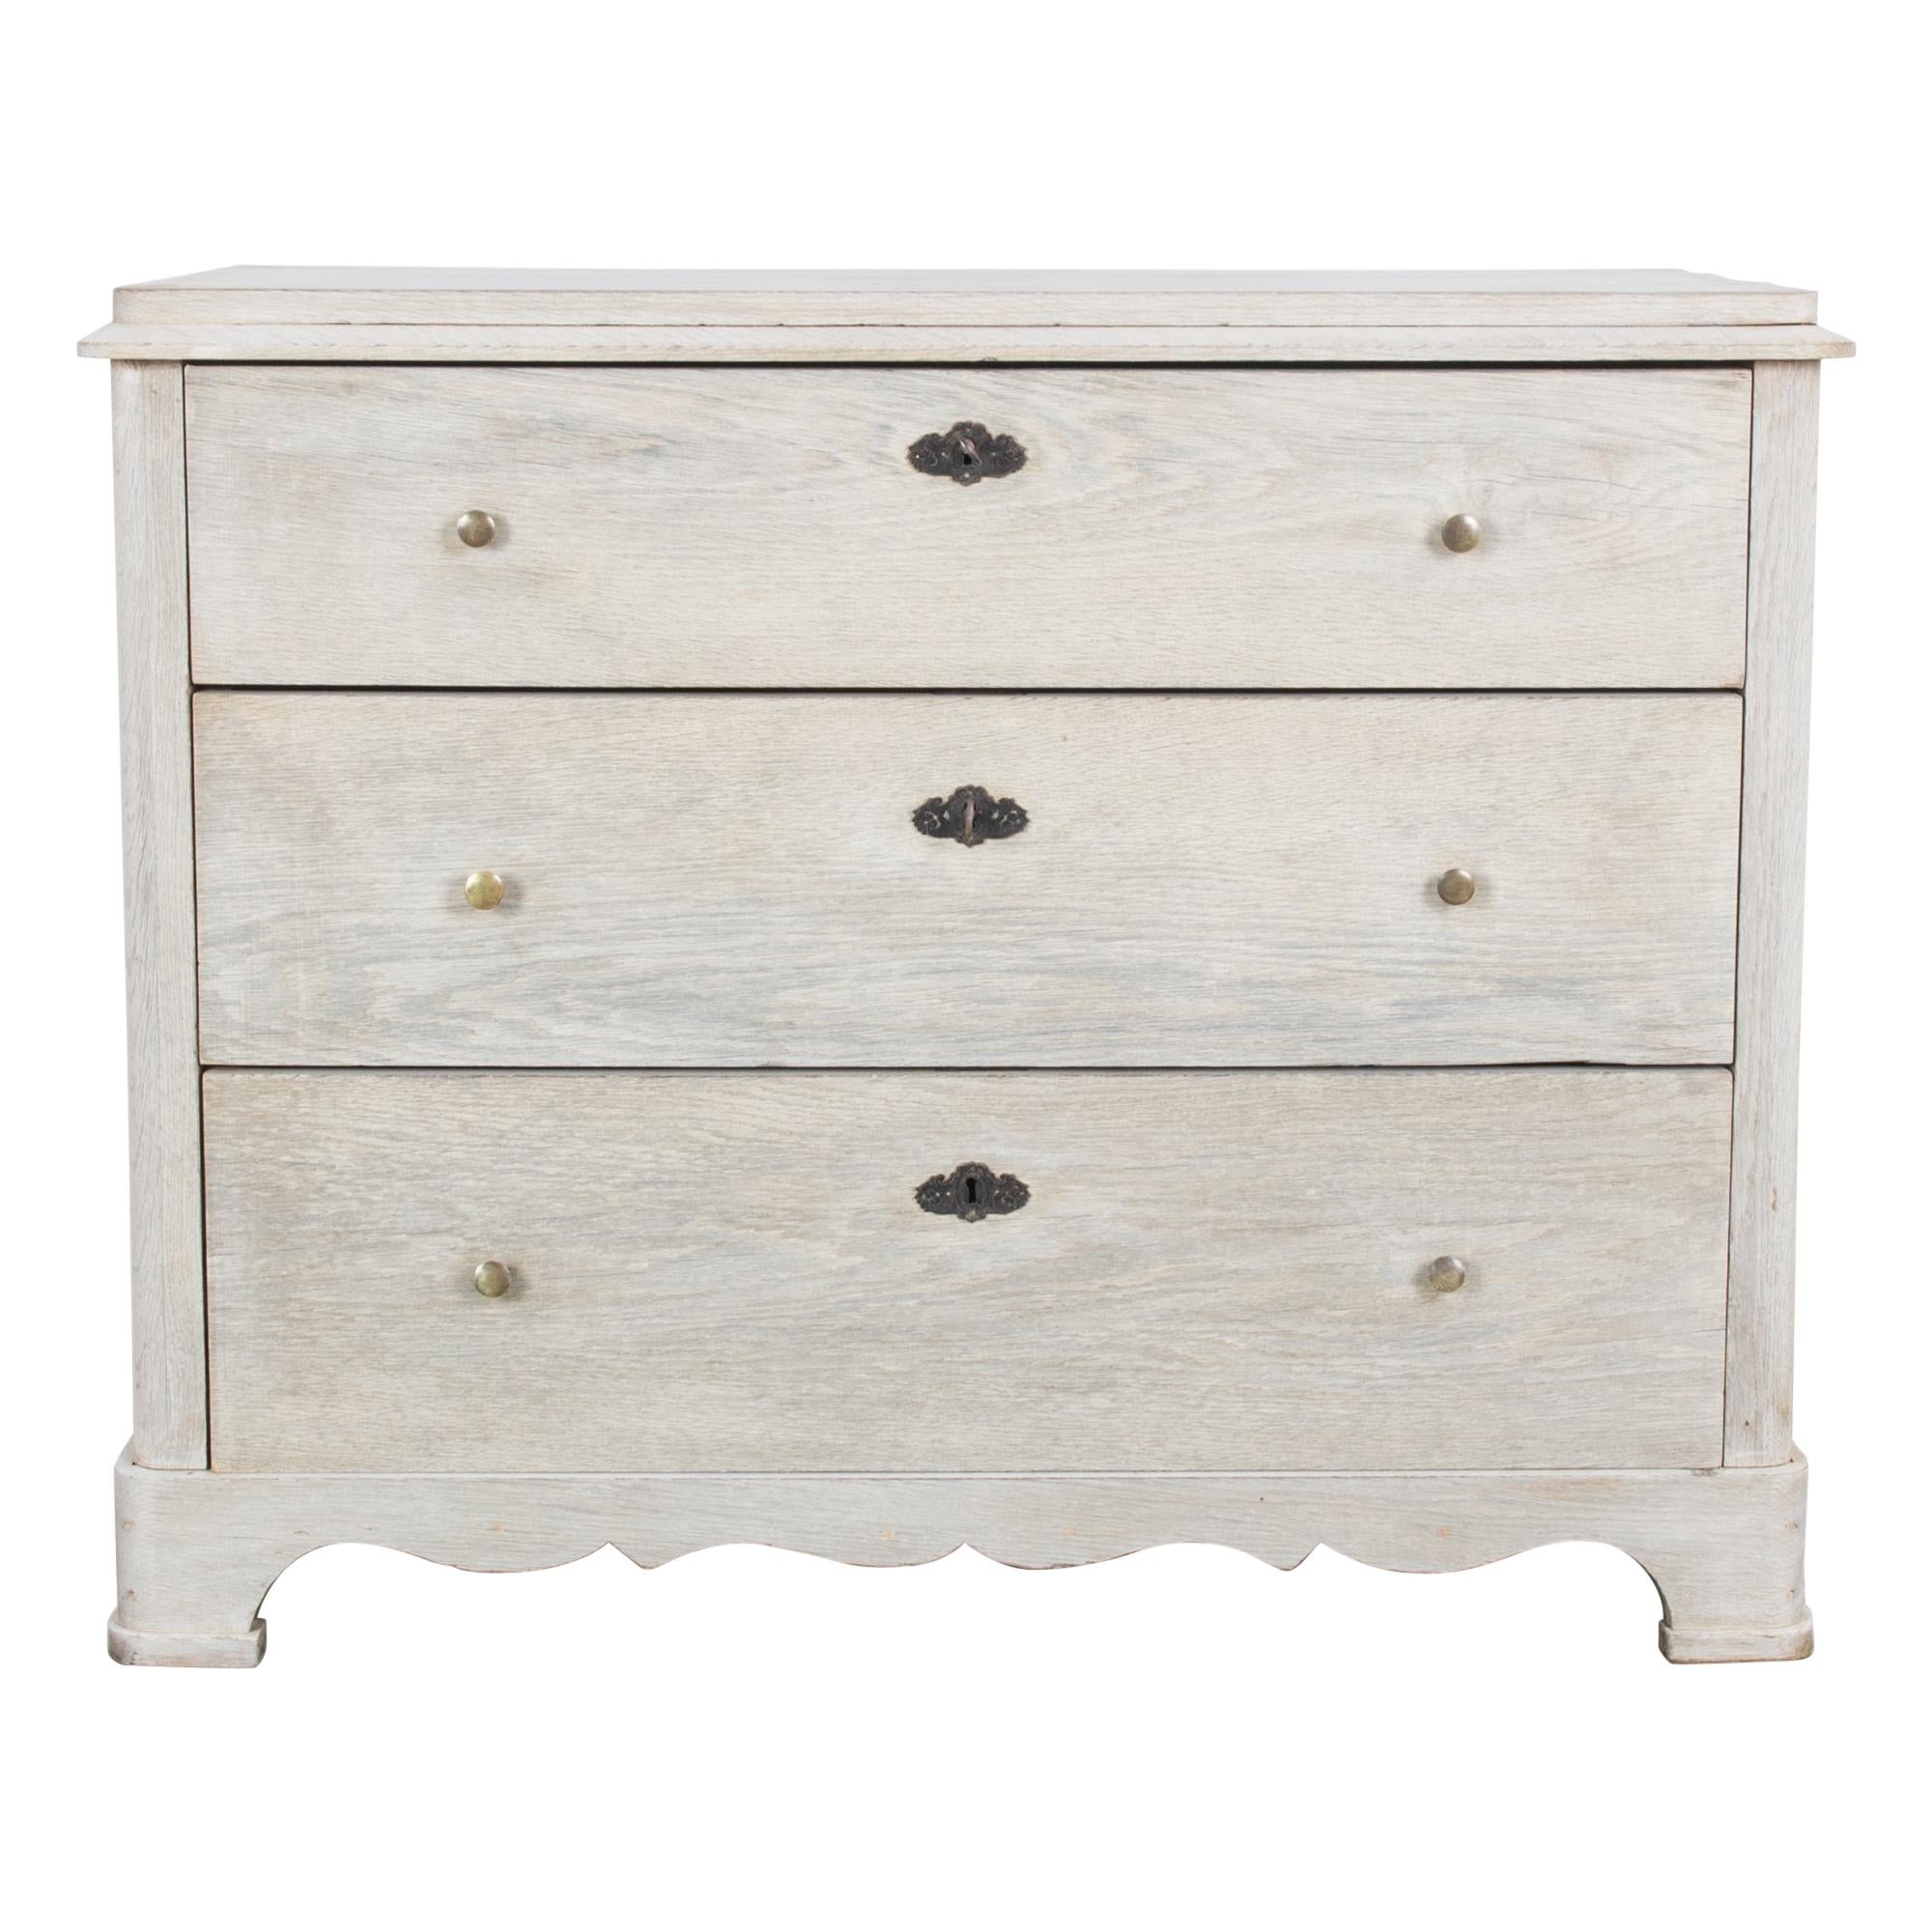 1880s Bleached Oak French Drawer Chest